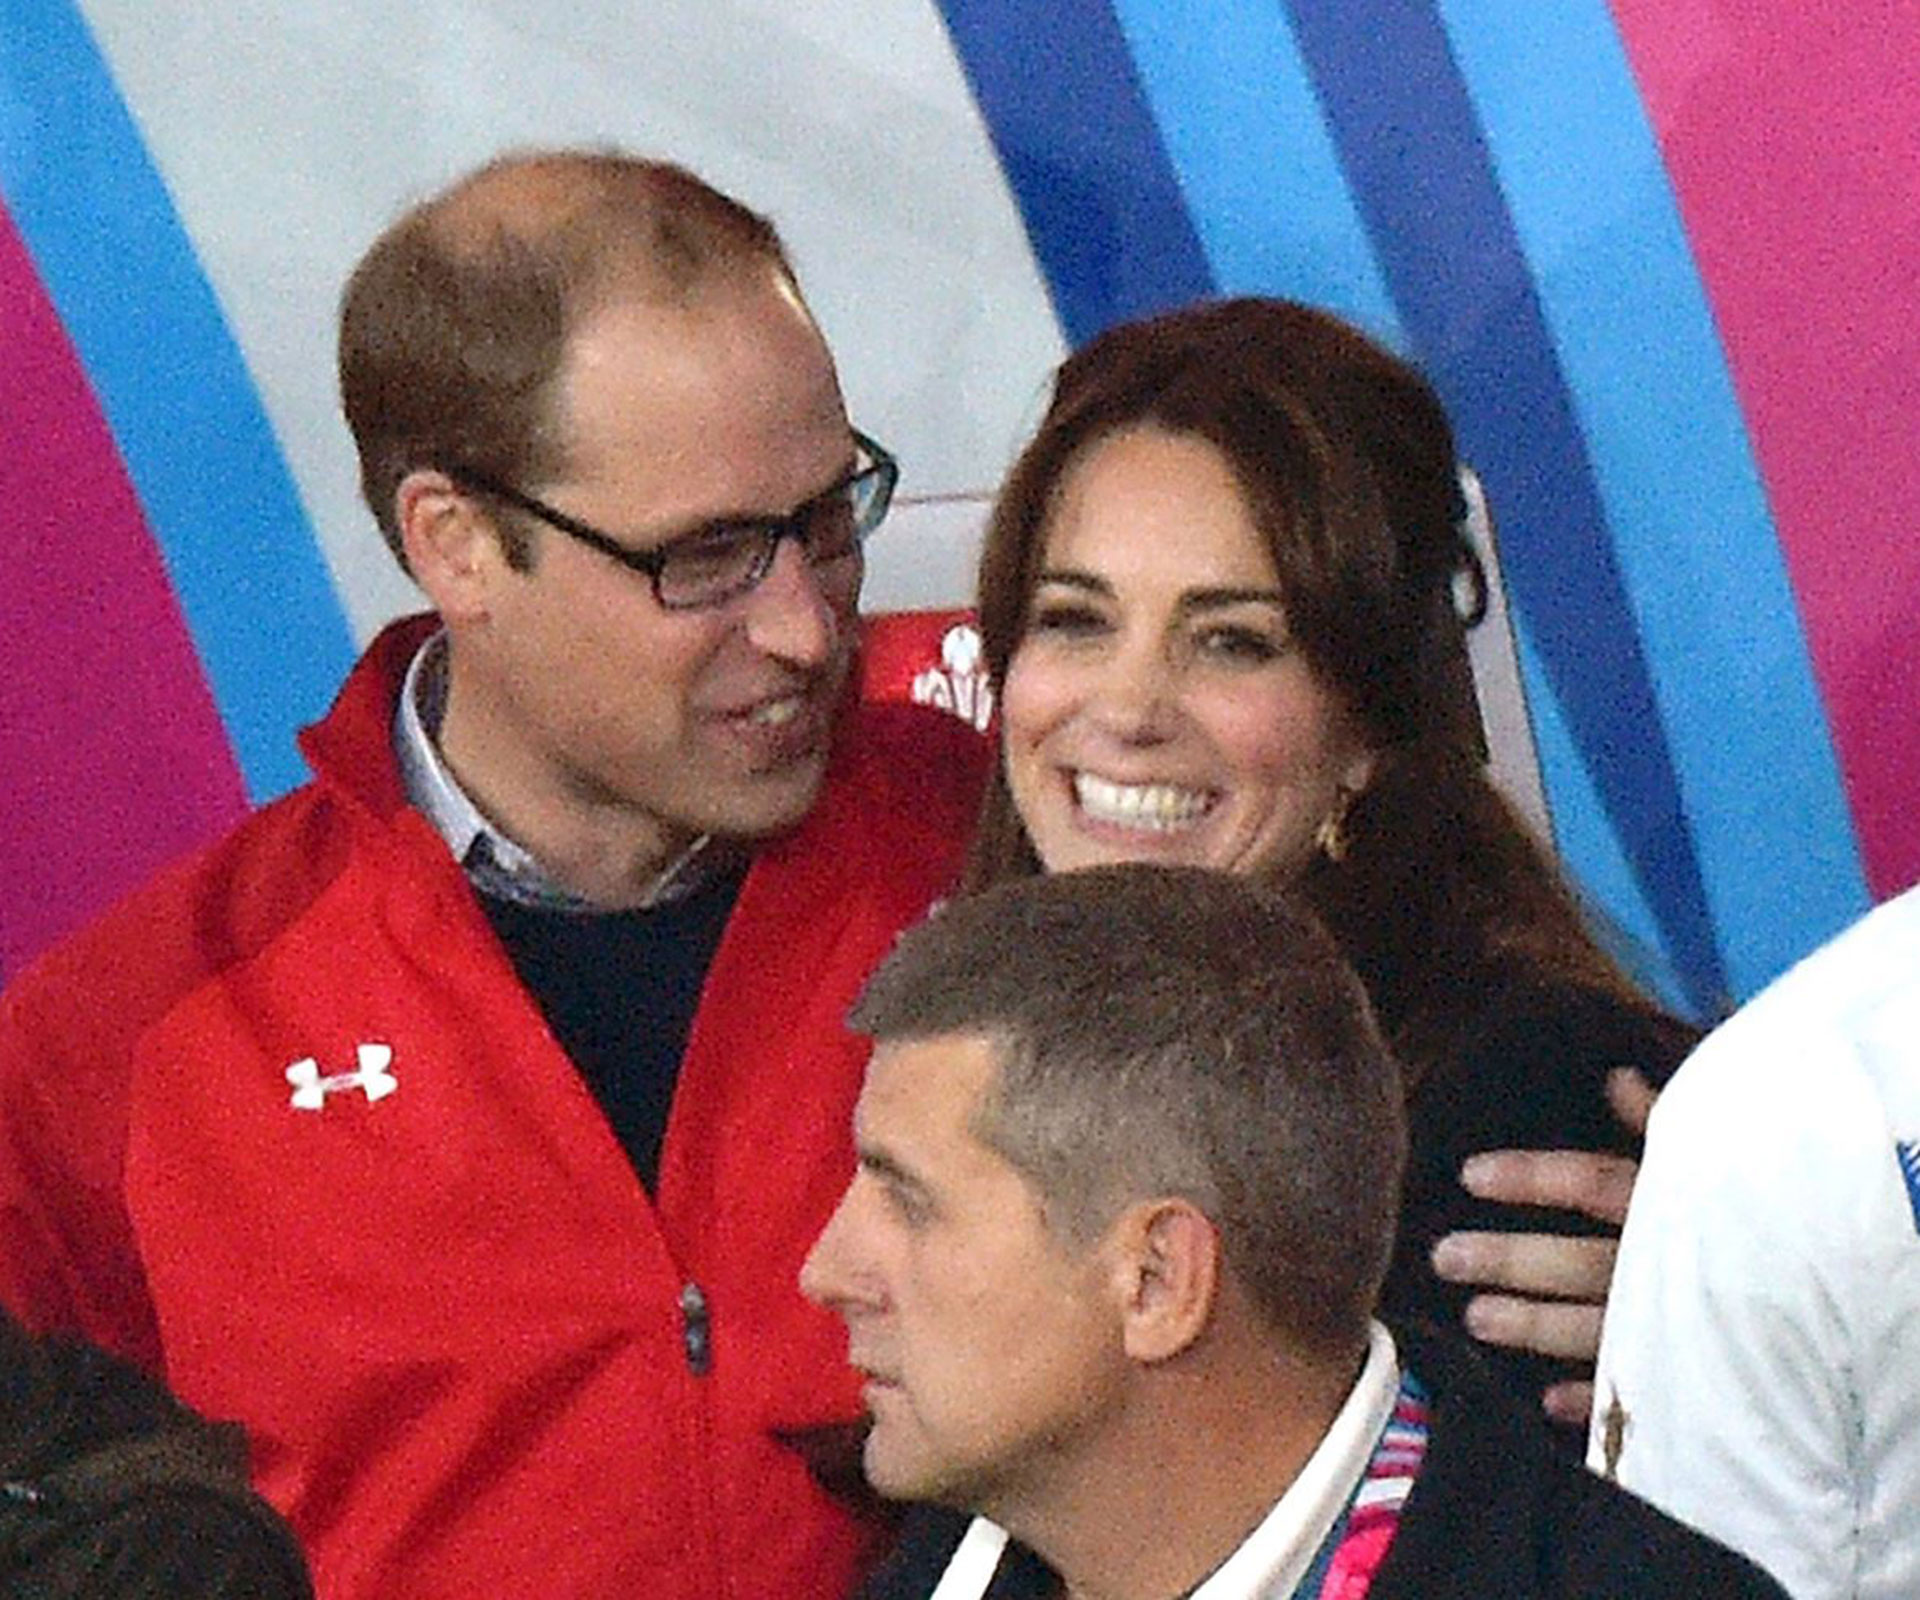 William and Kate get cosy at the rugby